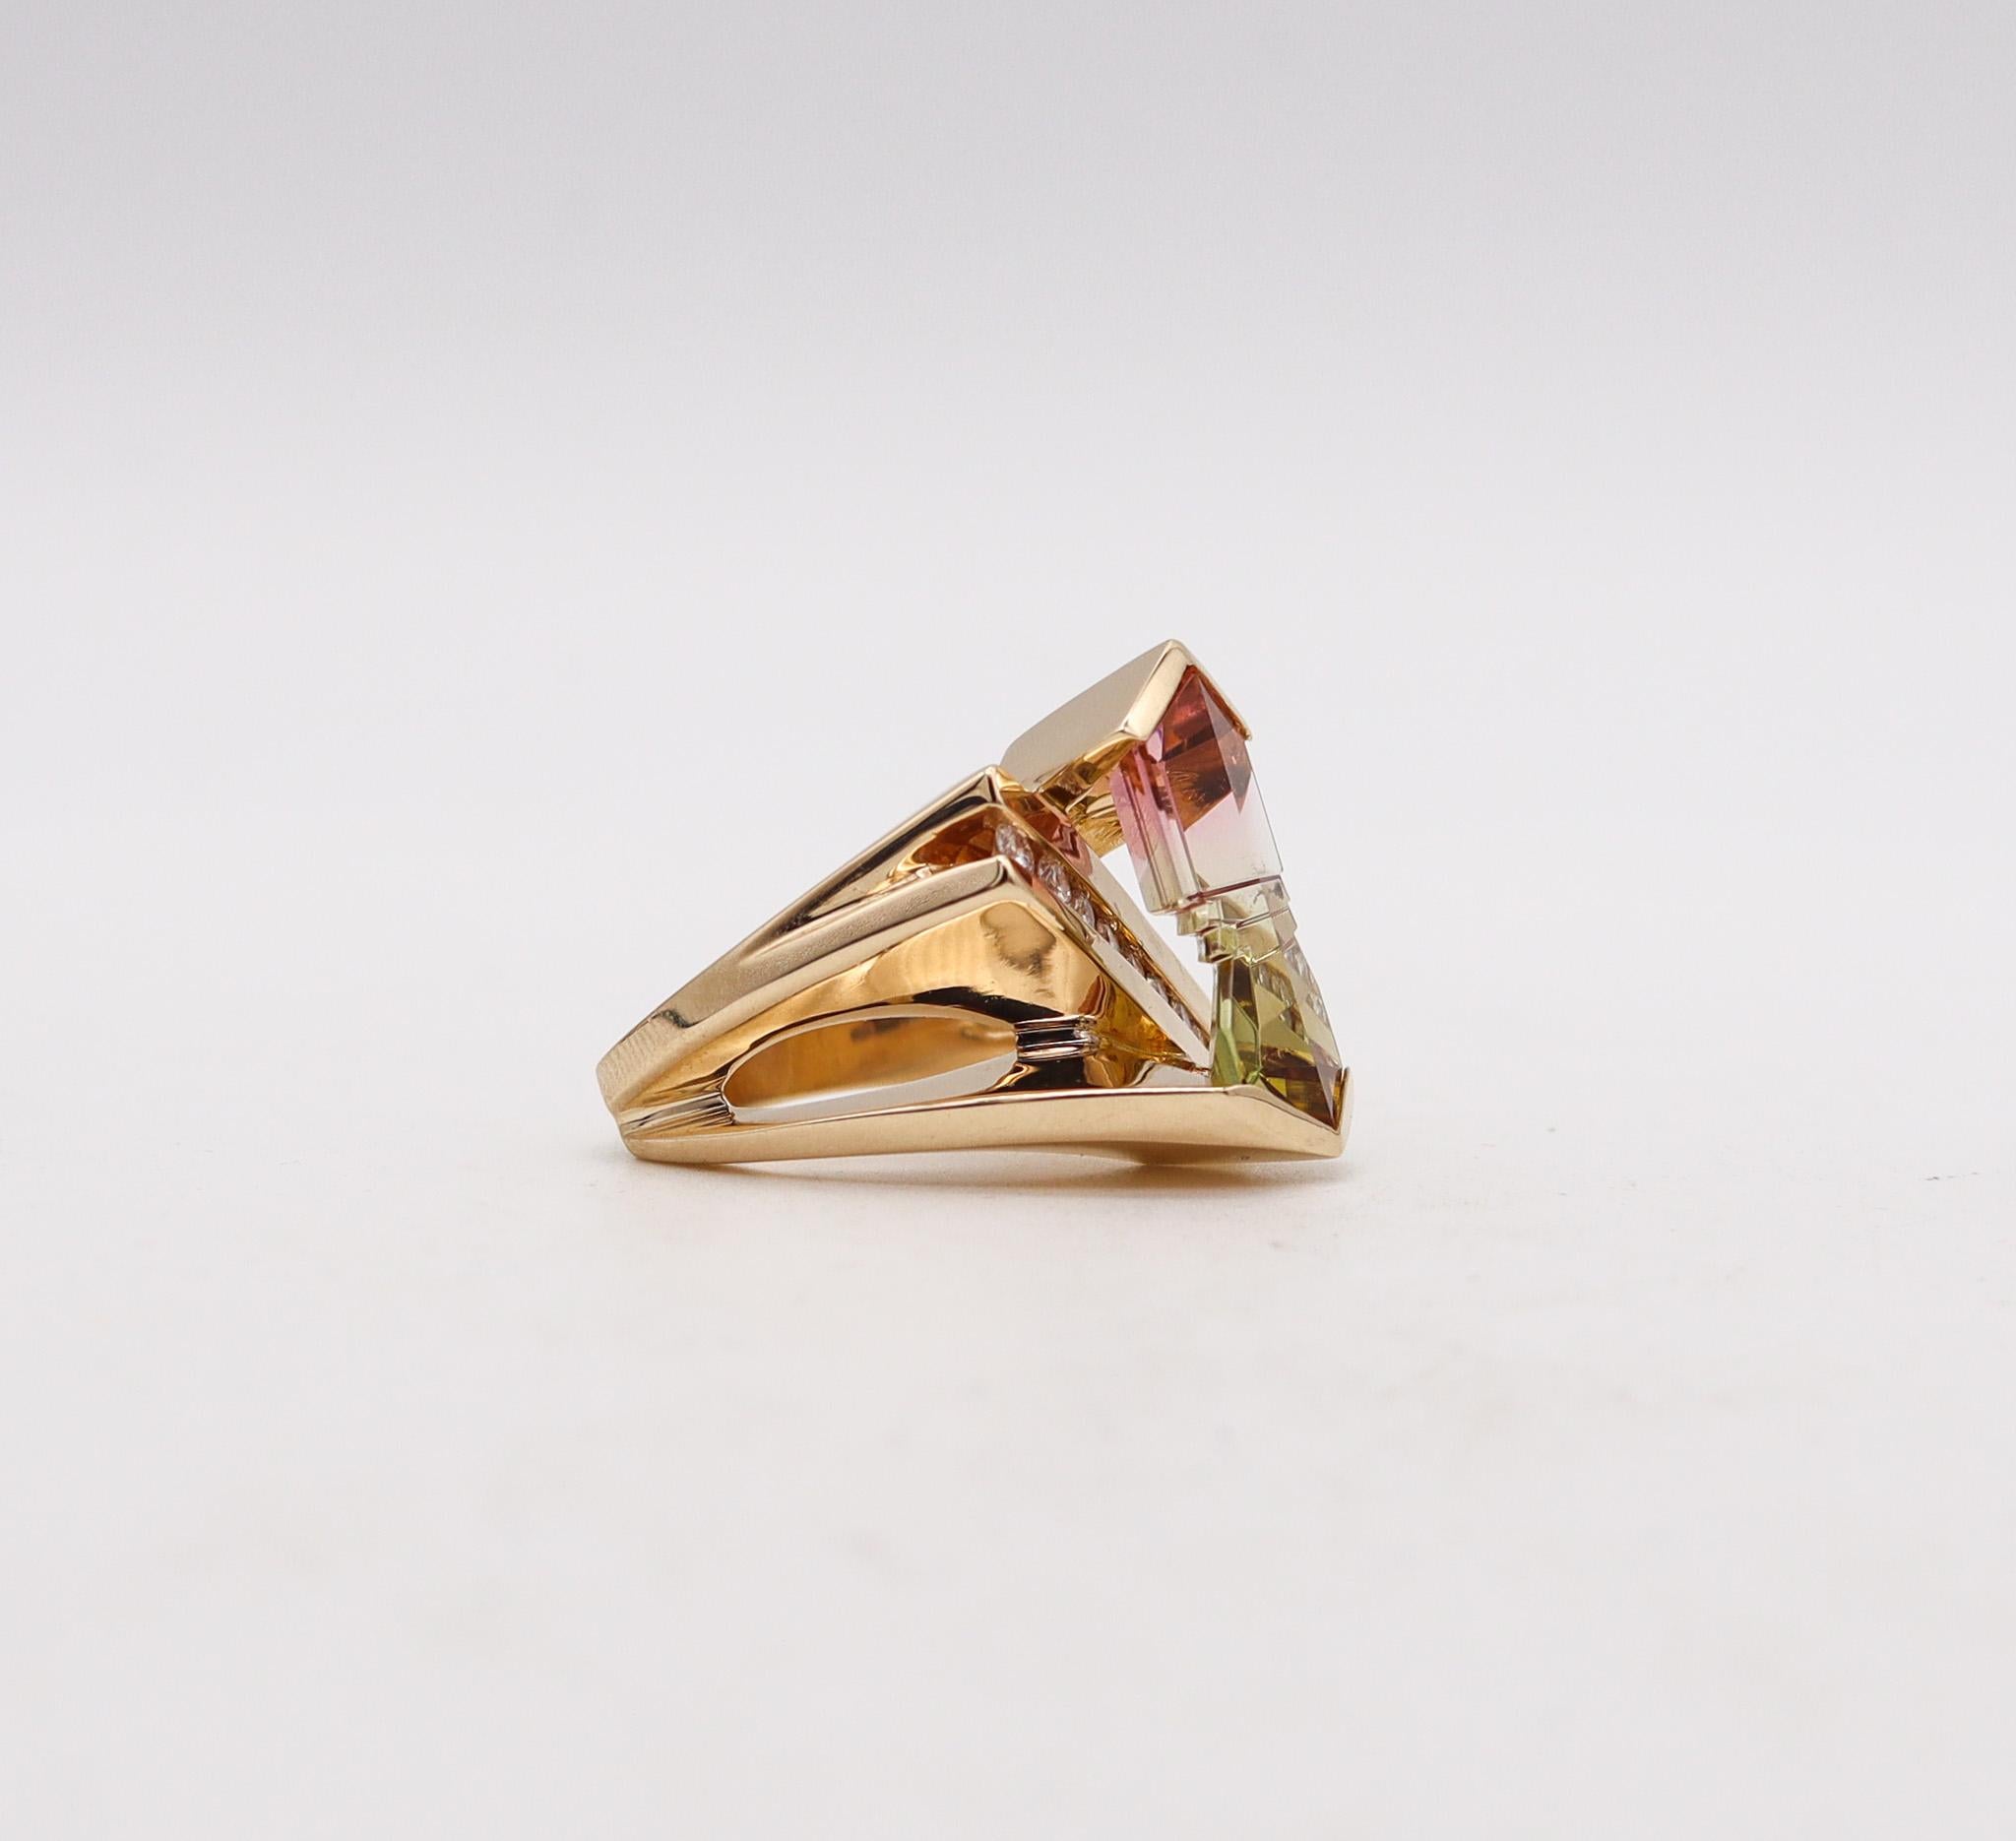 Geometric ring with a watermelon tourmaline designed by Munsteiner.

Fabulous geometric cocktail ring, created in Germany with modernist patterns back in the 1980. It was carefully crafted as a one of a kind piece, in solid yellow gold of 14 karats